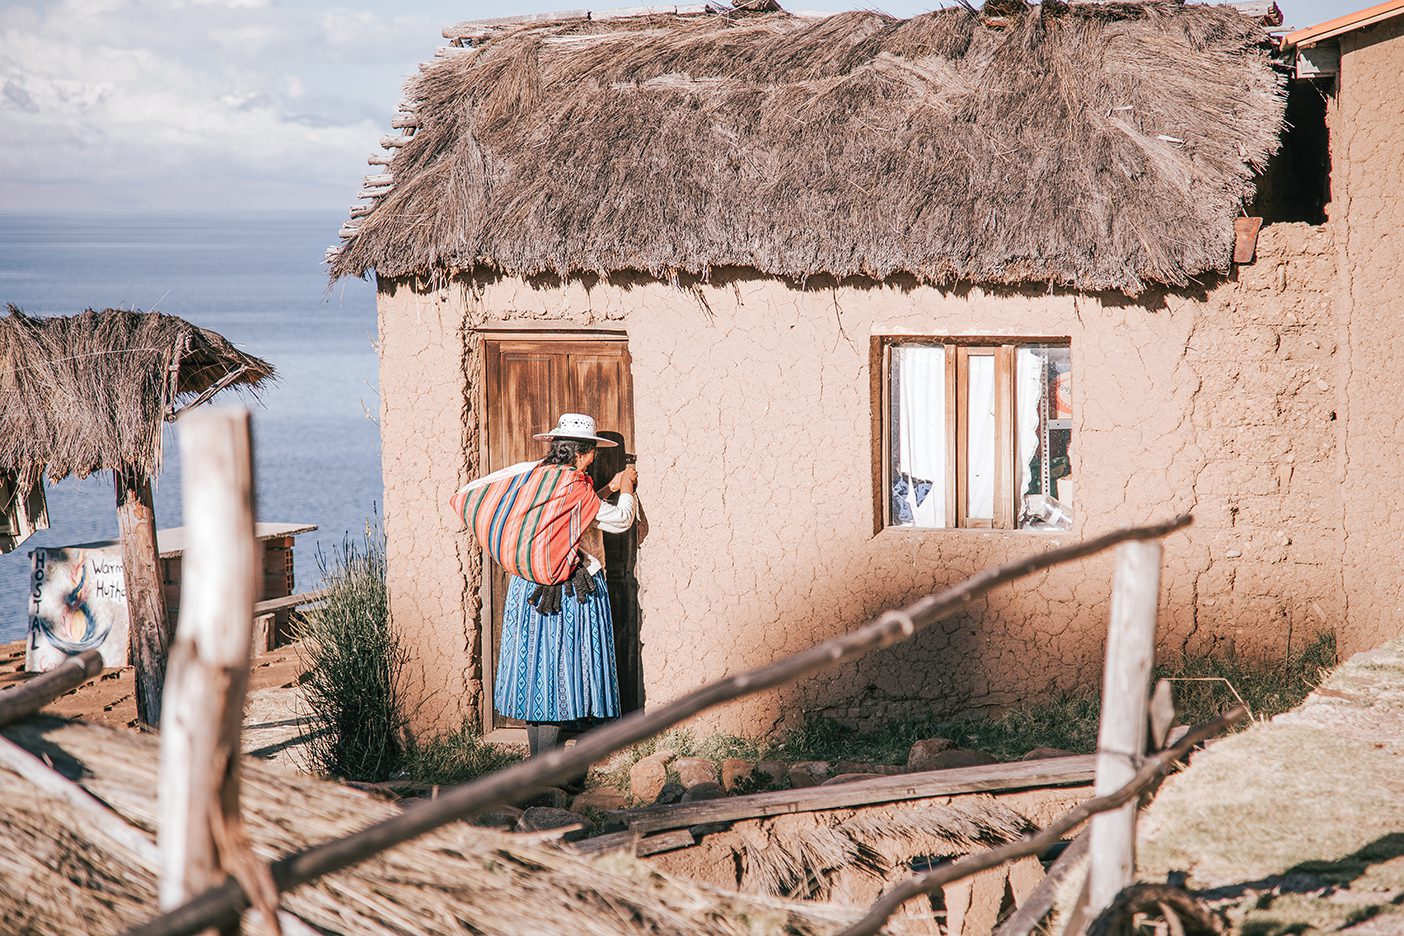 A woman carrying a colorful sack over her shoulder knocks on a traditional Bolivian home.